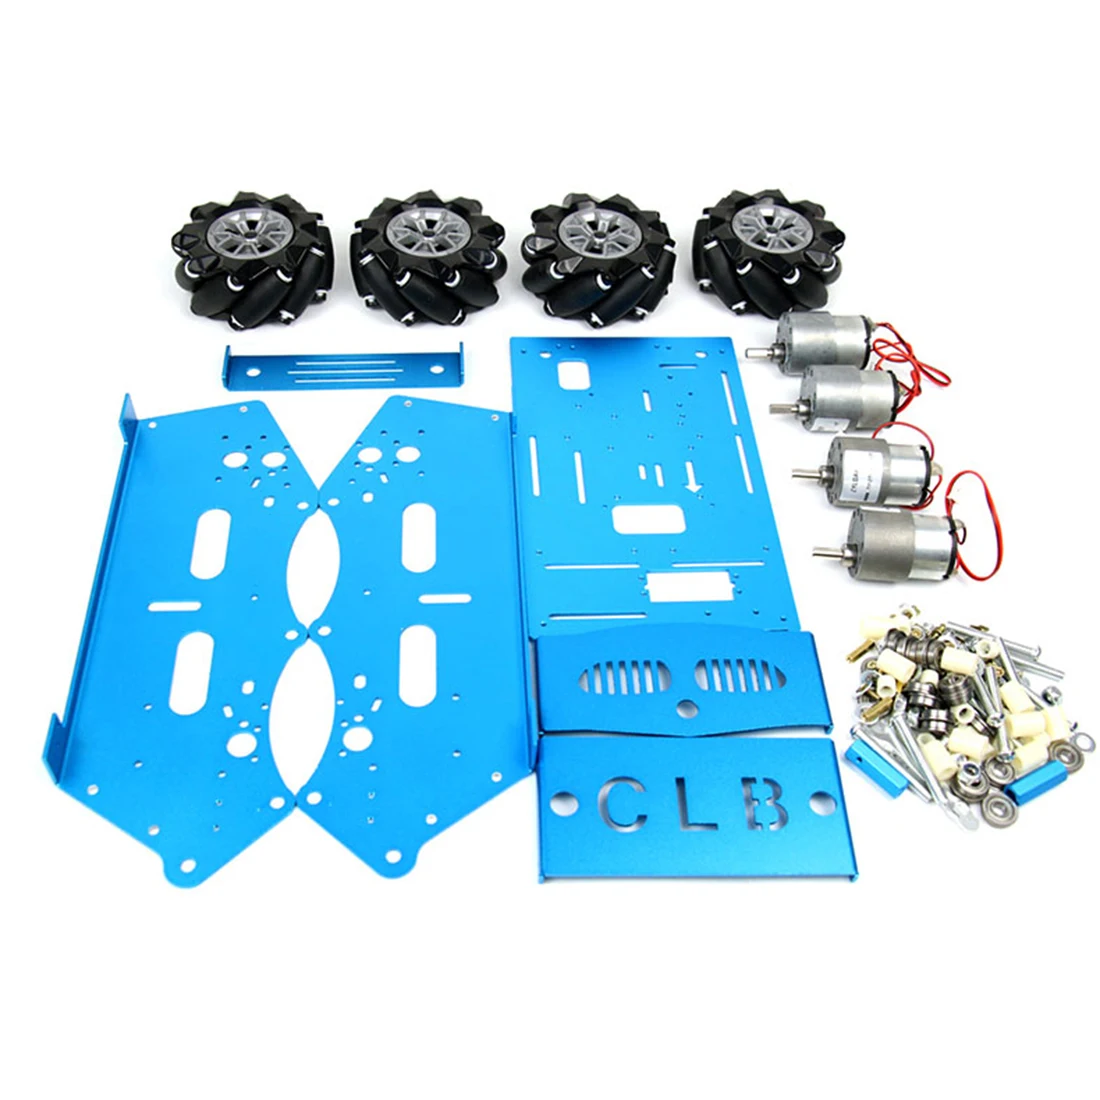 US $101.99 Programming Car Metal Chassis Mecanum Wheel Chassis Steam Kit for Raspberry Pi Arduino Mcu51 Stm32